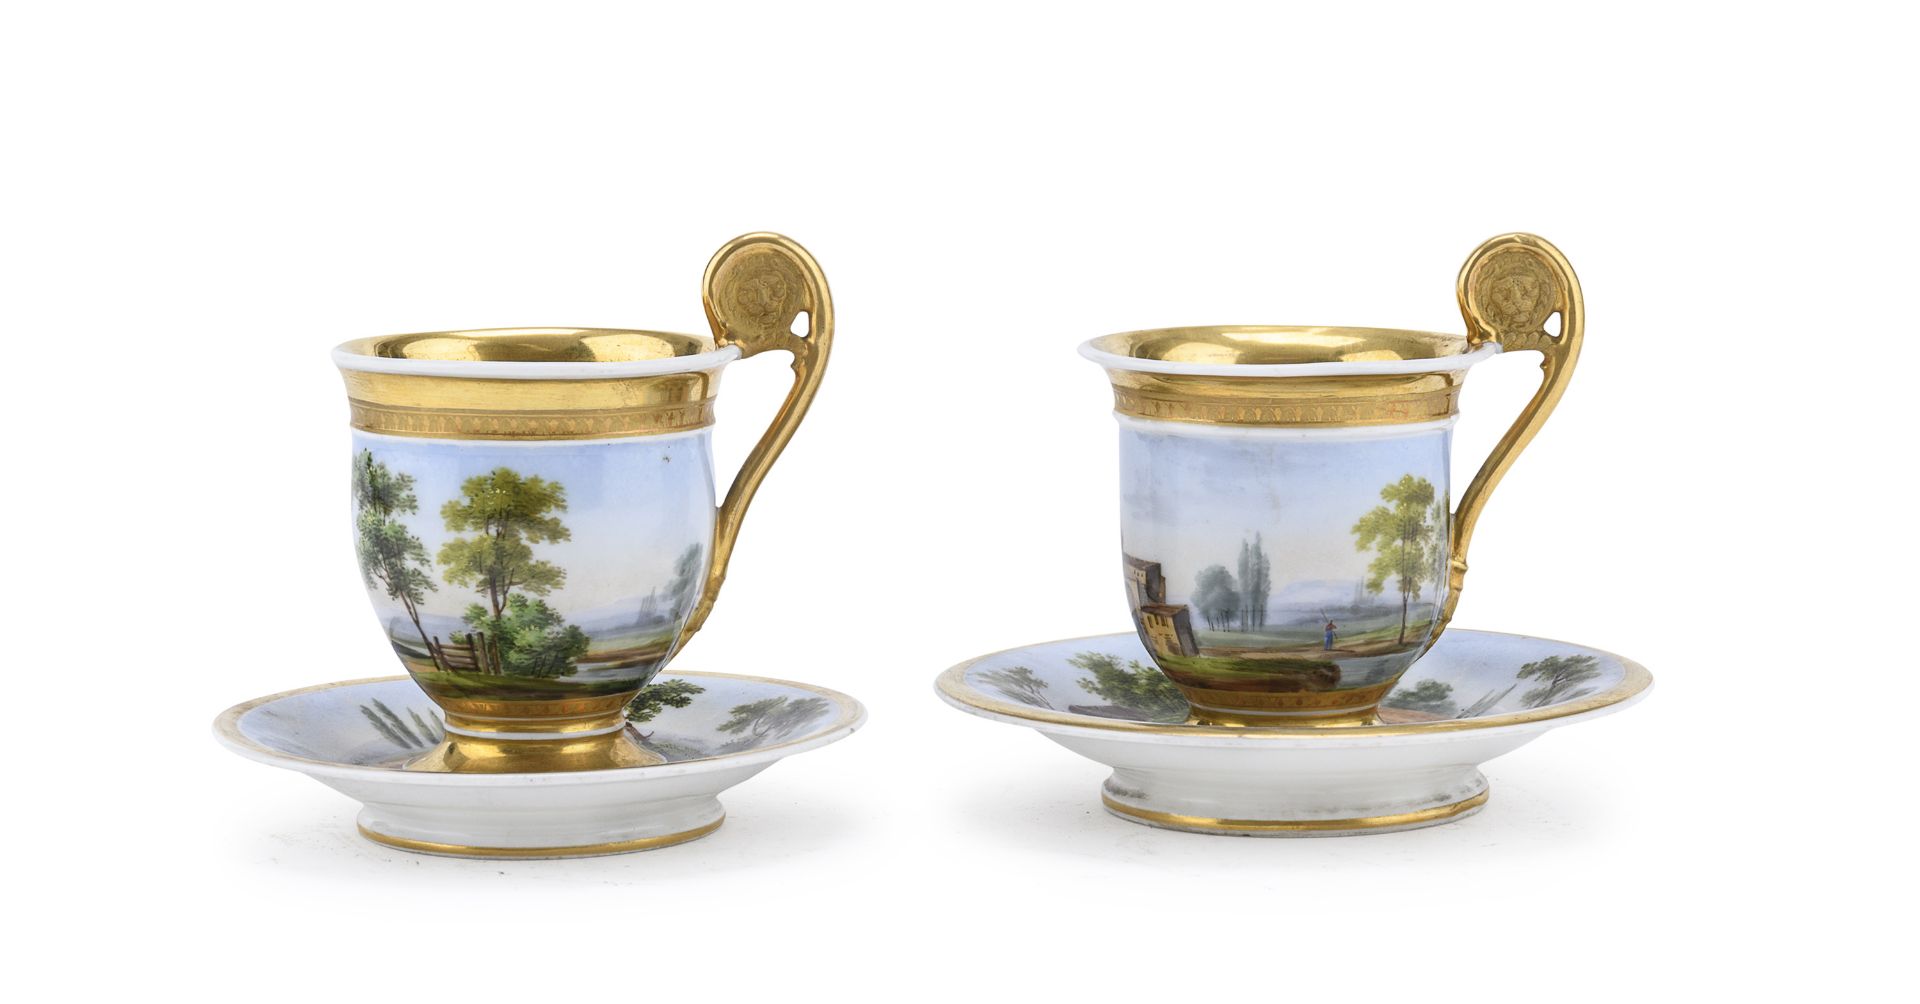 PAIR OF PORCELAIN CUPS WITH SAUCERS FIRST HALF 19TH CENTURY - Image 2 of 2